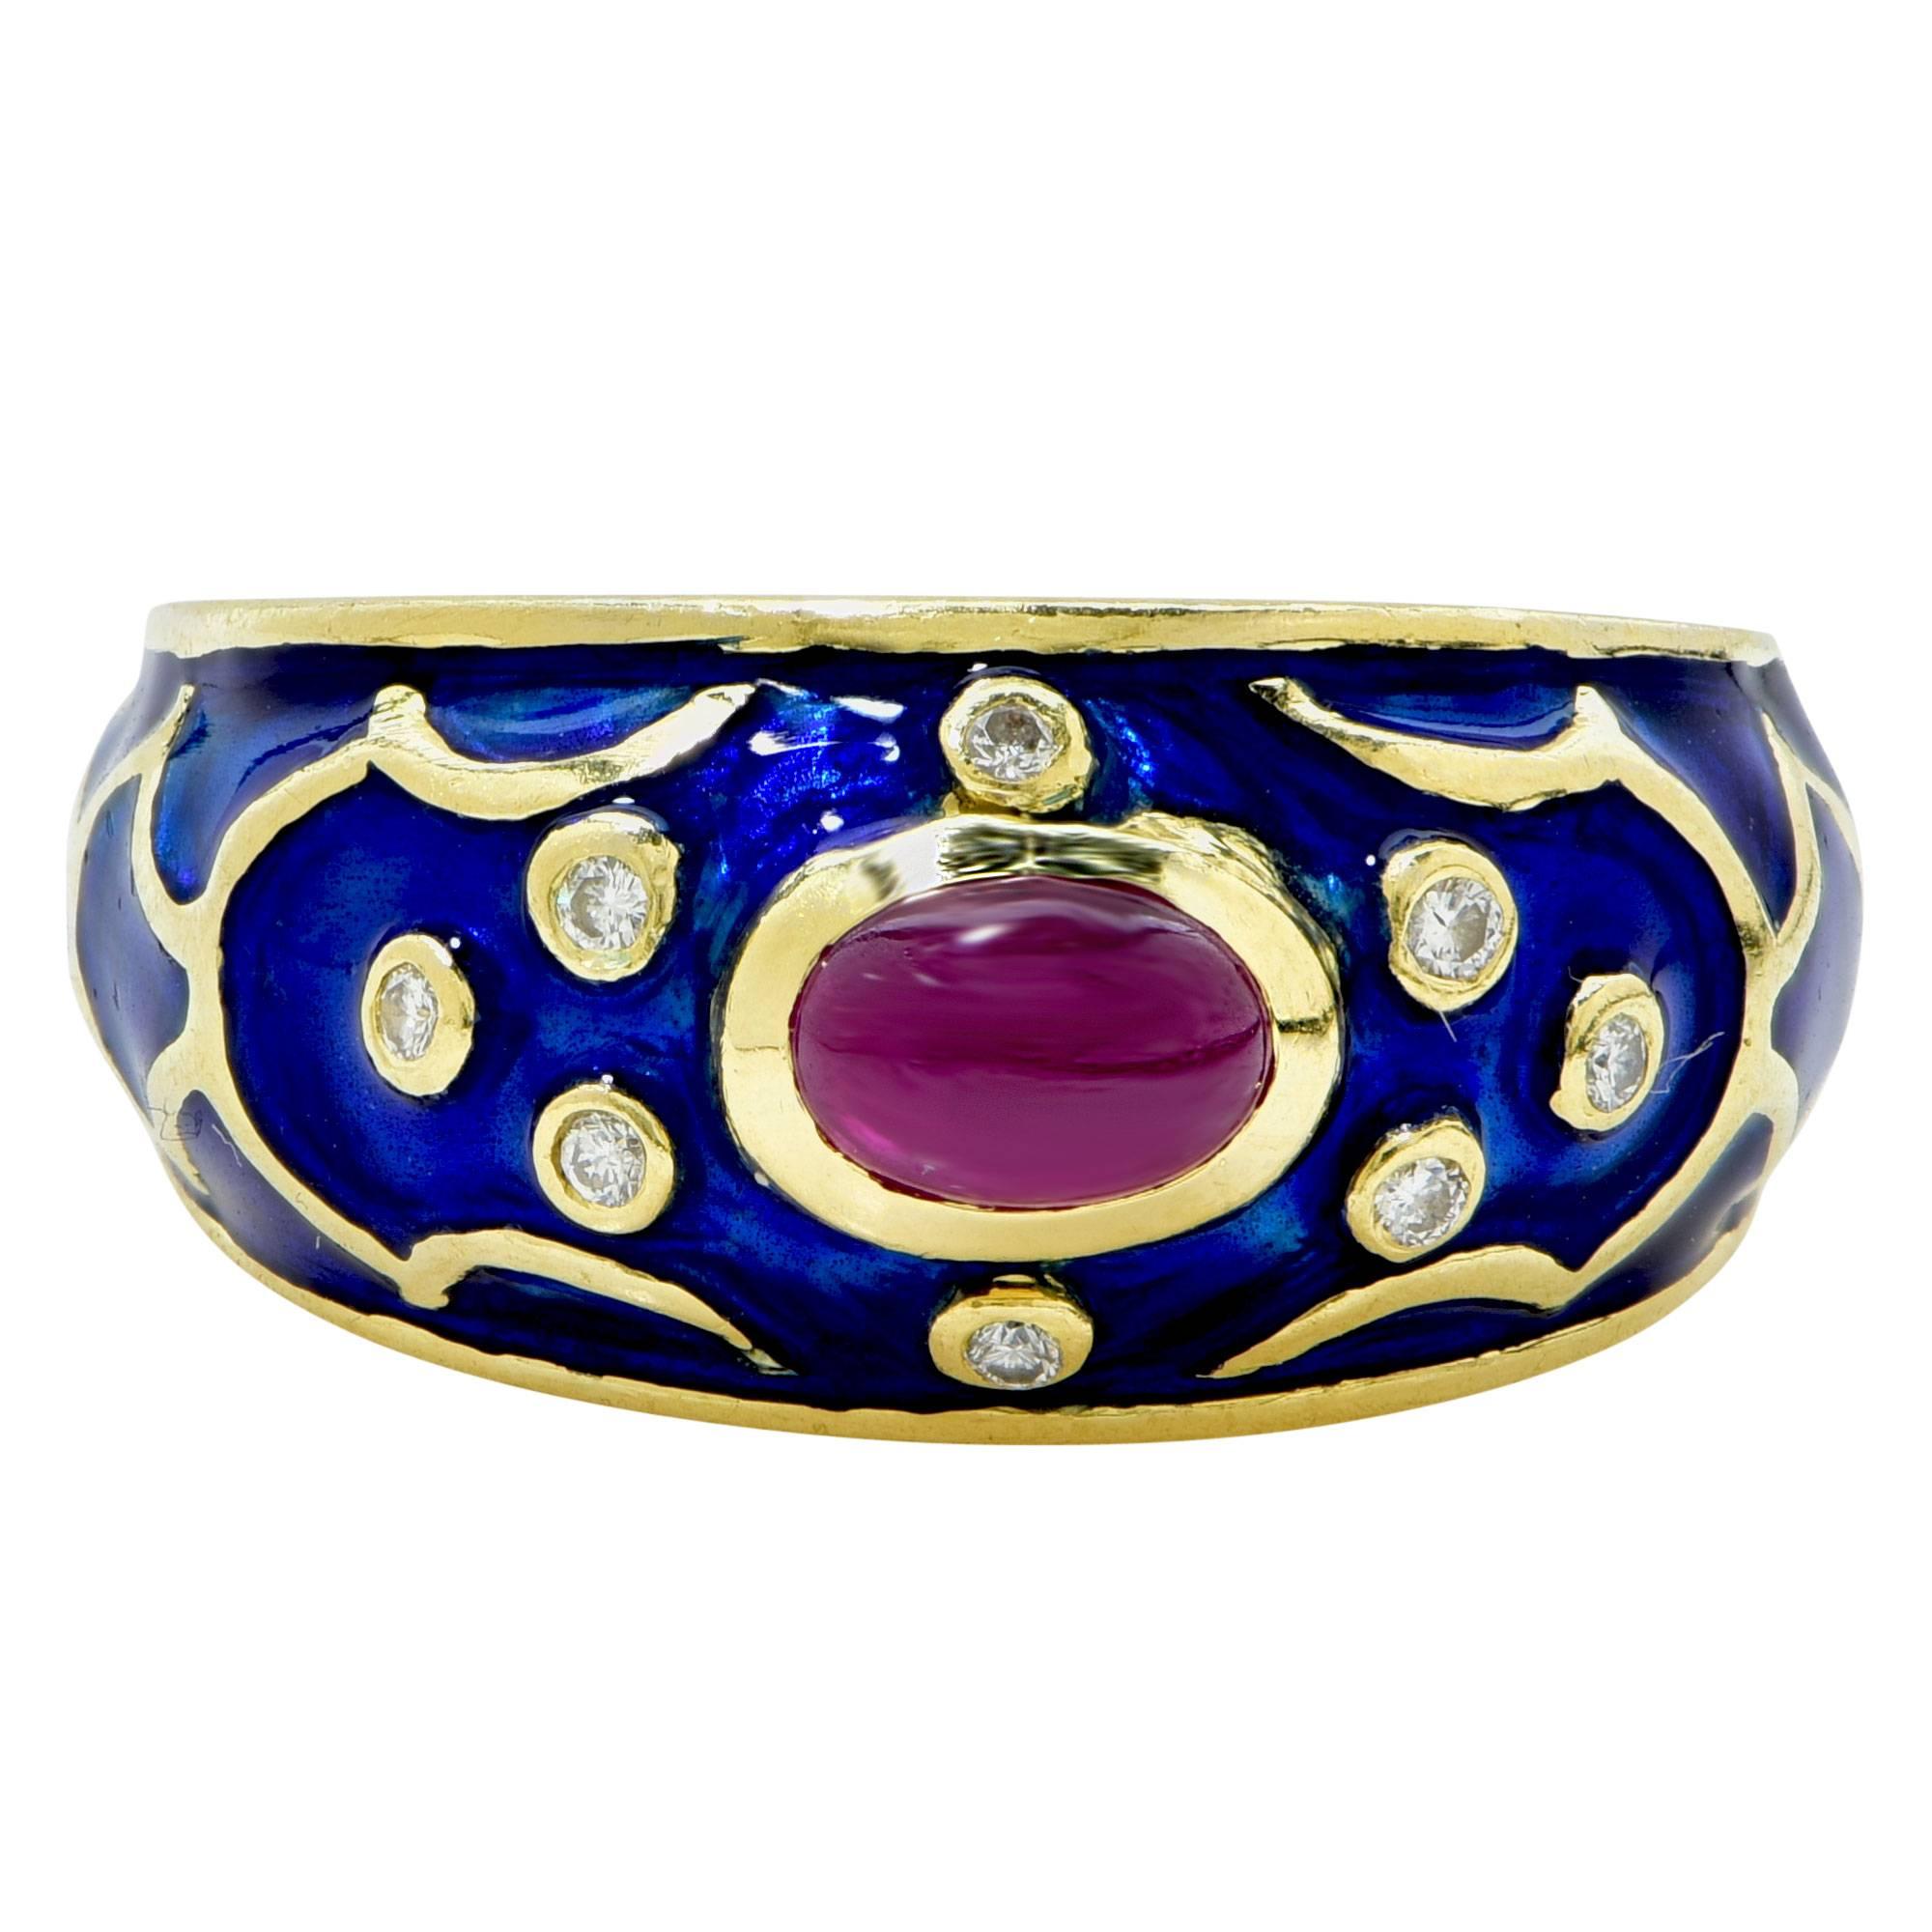 18k yellow gold enamel ring featuring a cabochon ruby accented by 8 round brilliant cut diamonds weighing approximately .10cts total. 

Ring size: 7.5 (can be sized up or down)
Metal weight: 10.10 grams

This ruby and diamond ring is